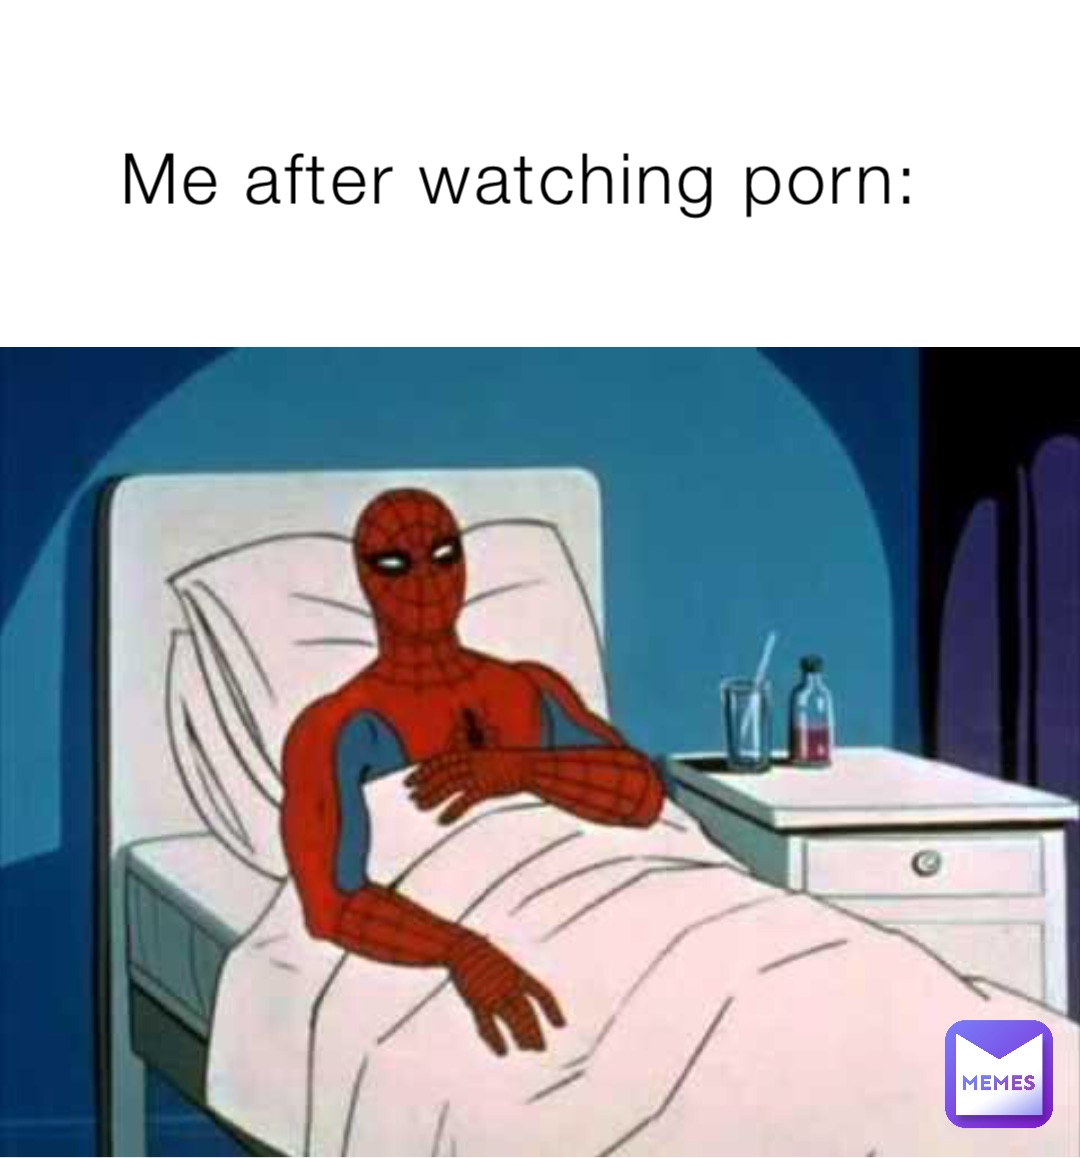 Me after watching porn: